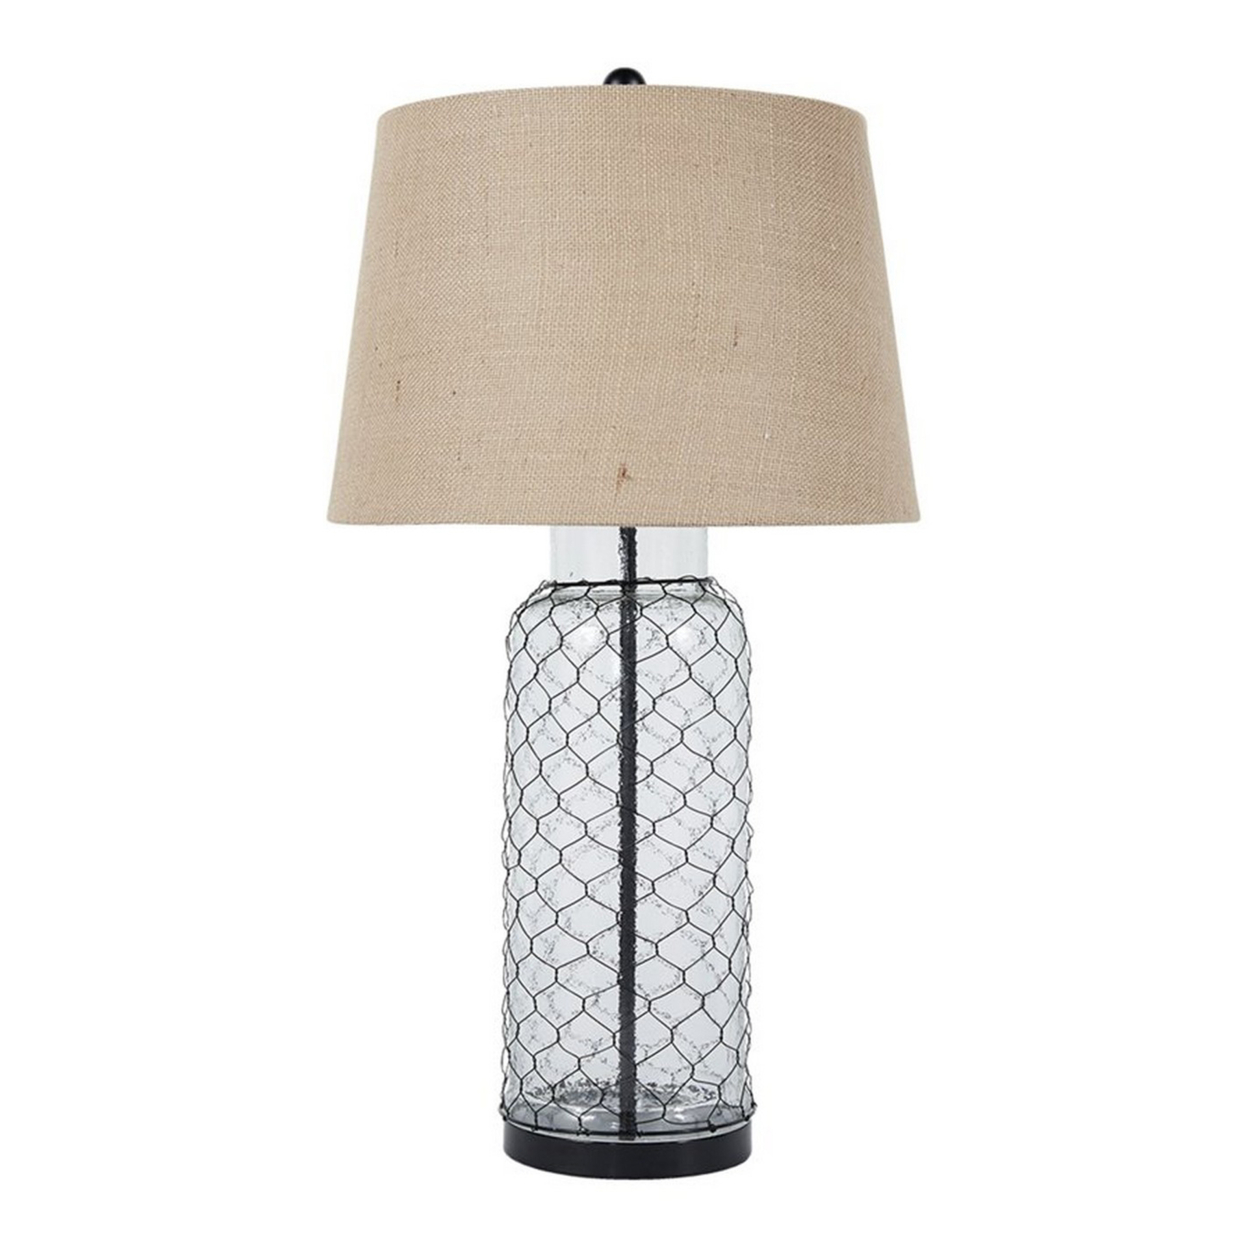 Woven Wire Wrapped Glass Base Table Lamp With Fabric Shade, Beige- Saltoro Sherpi